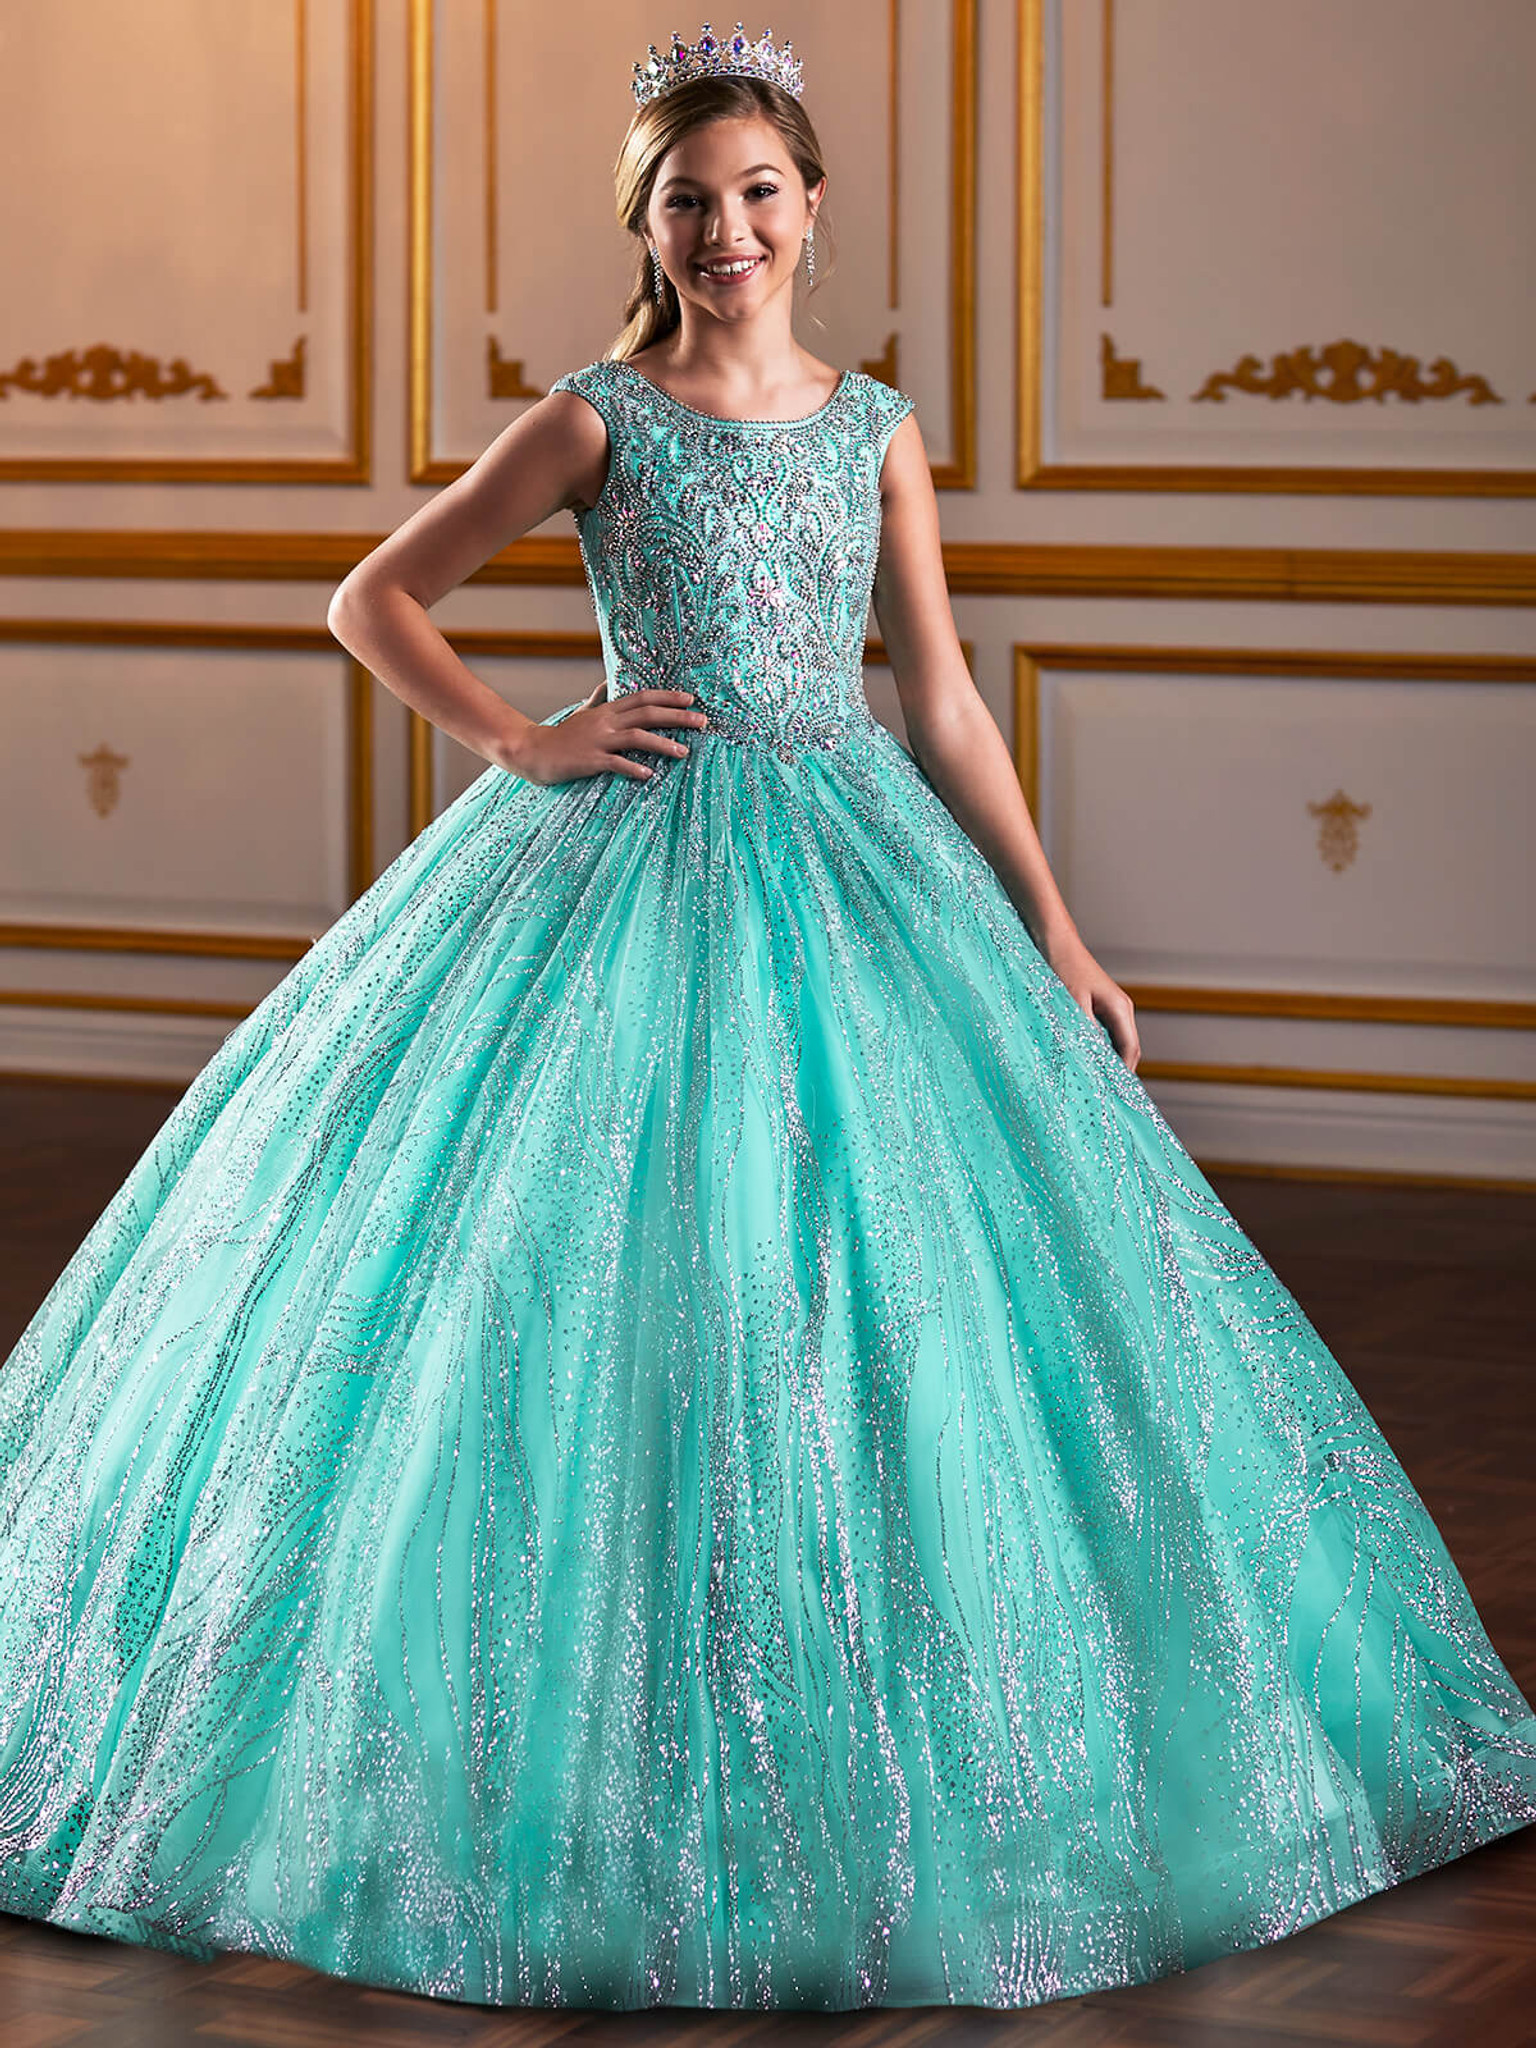 Cracked Ice Tiffany Designs 13575 Pageant Dress PageantDesigns